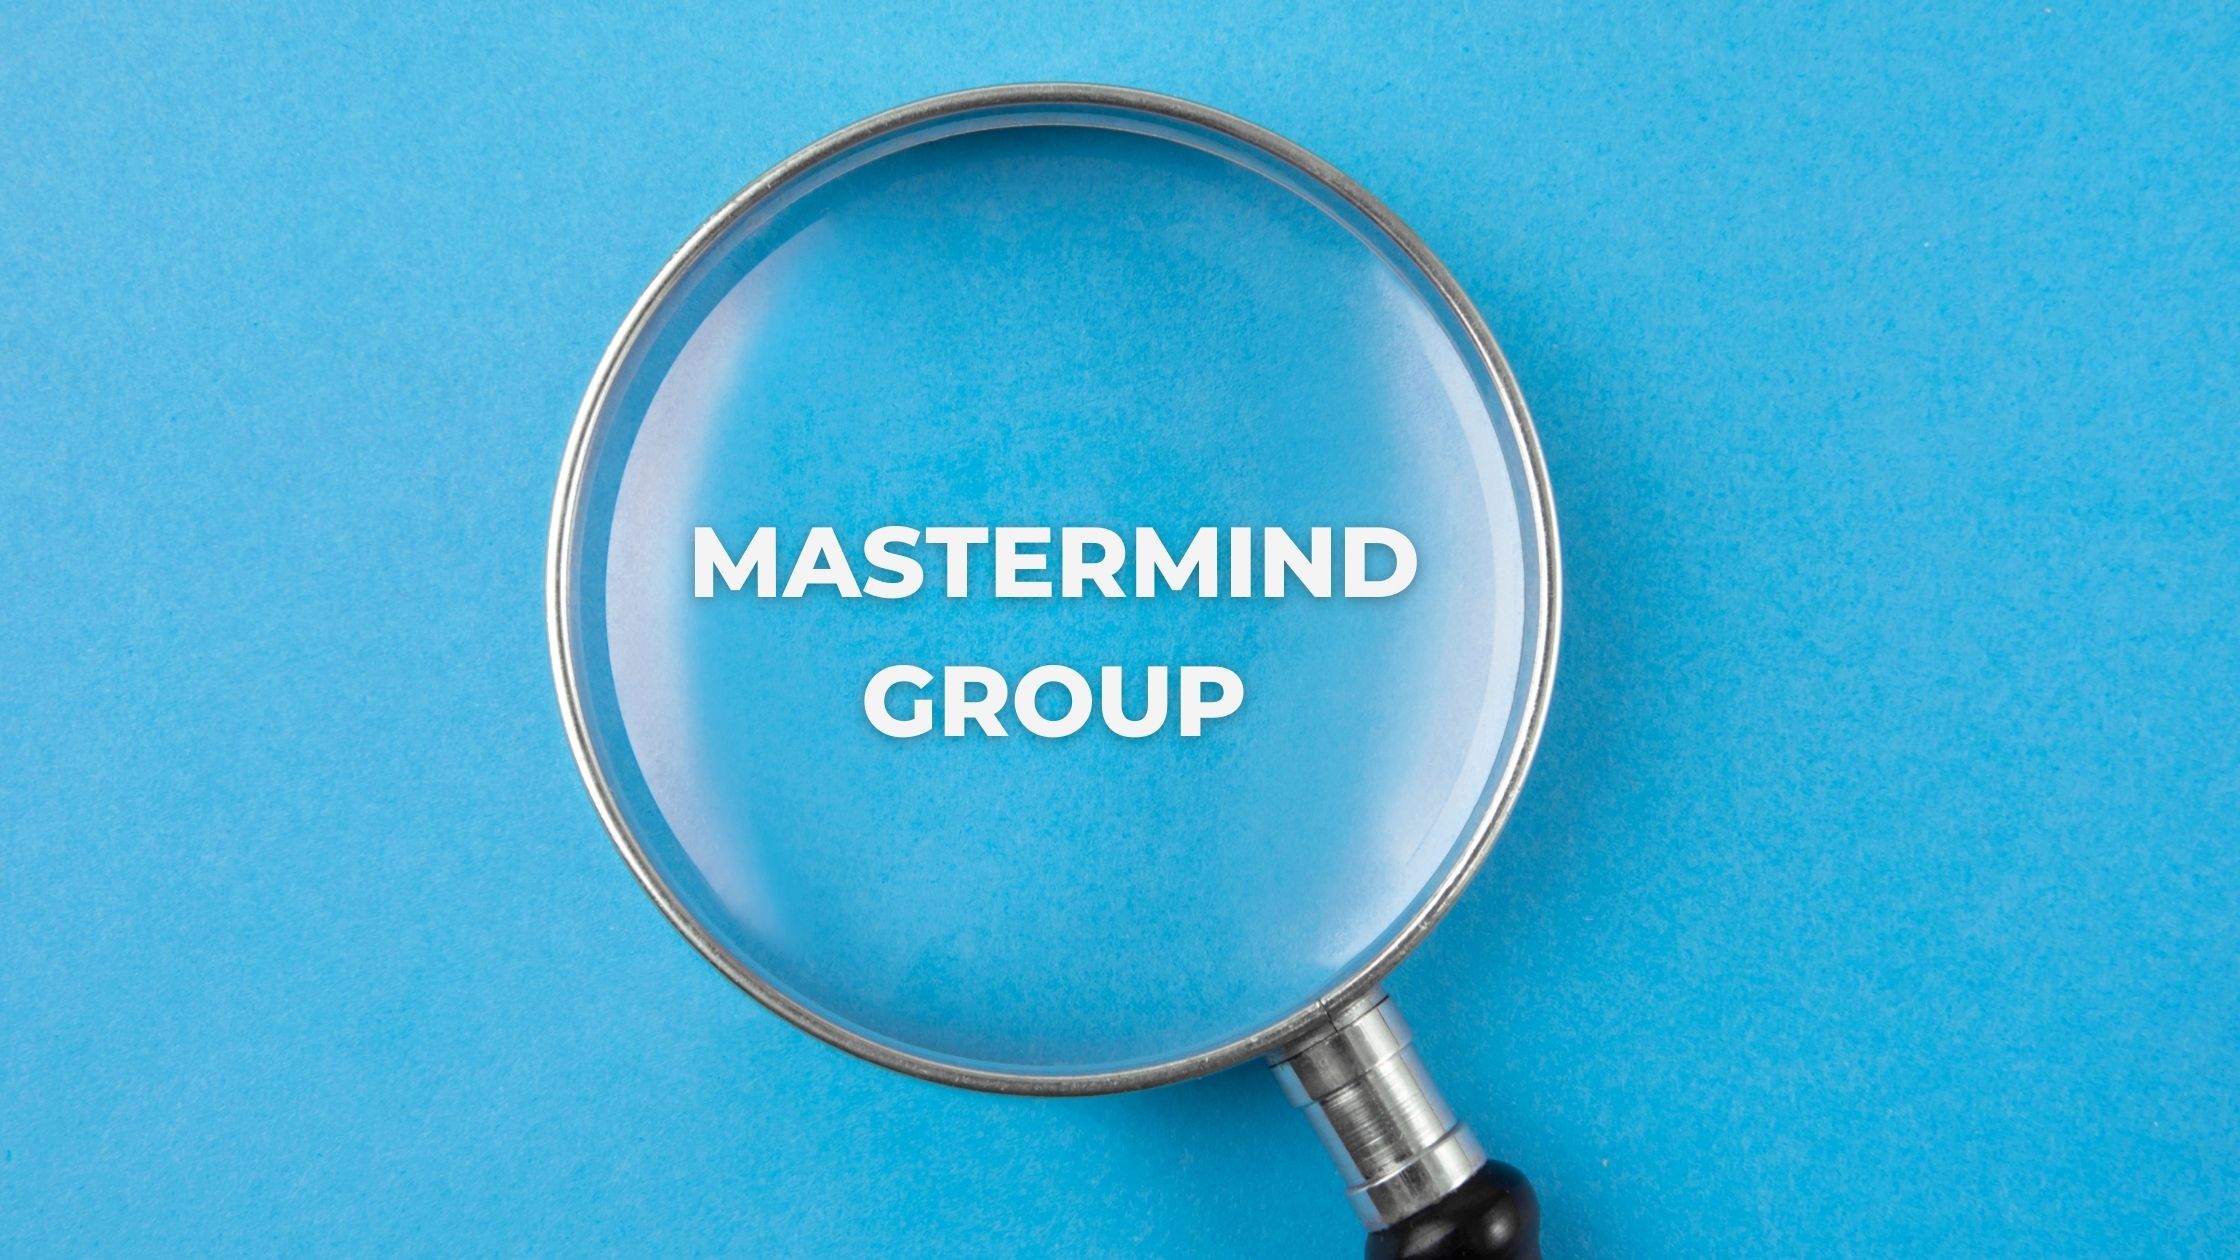 How To Find A Mastermind Group